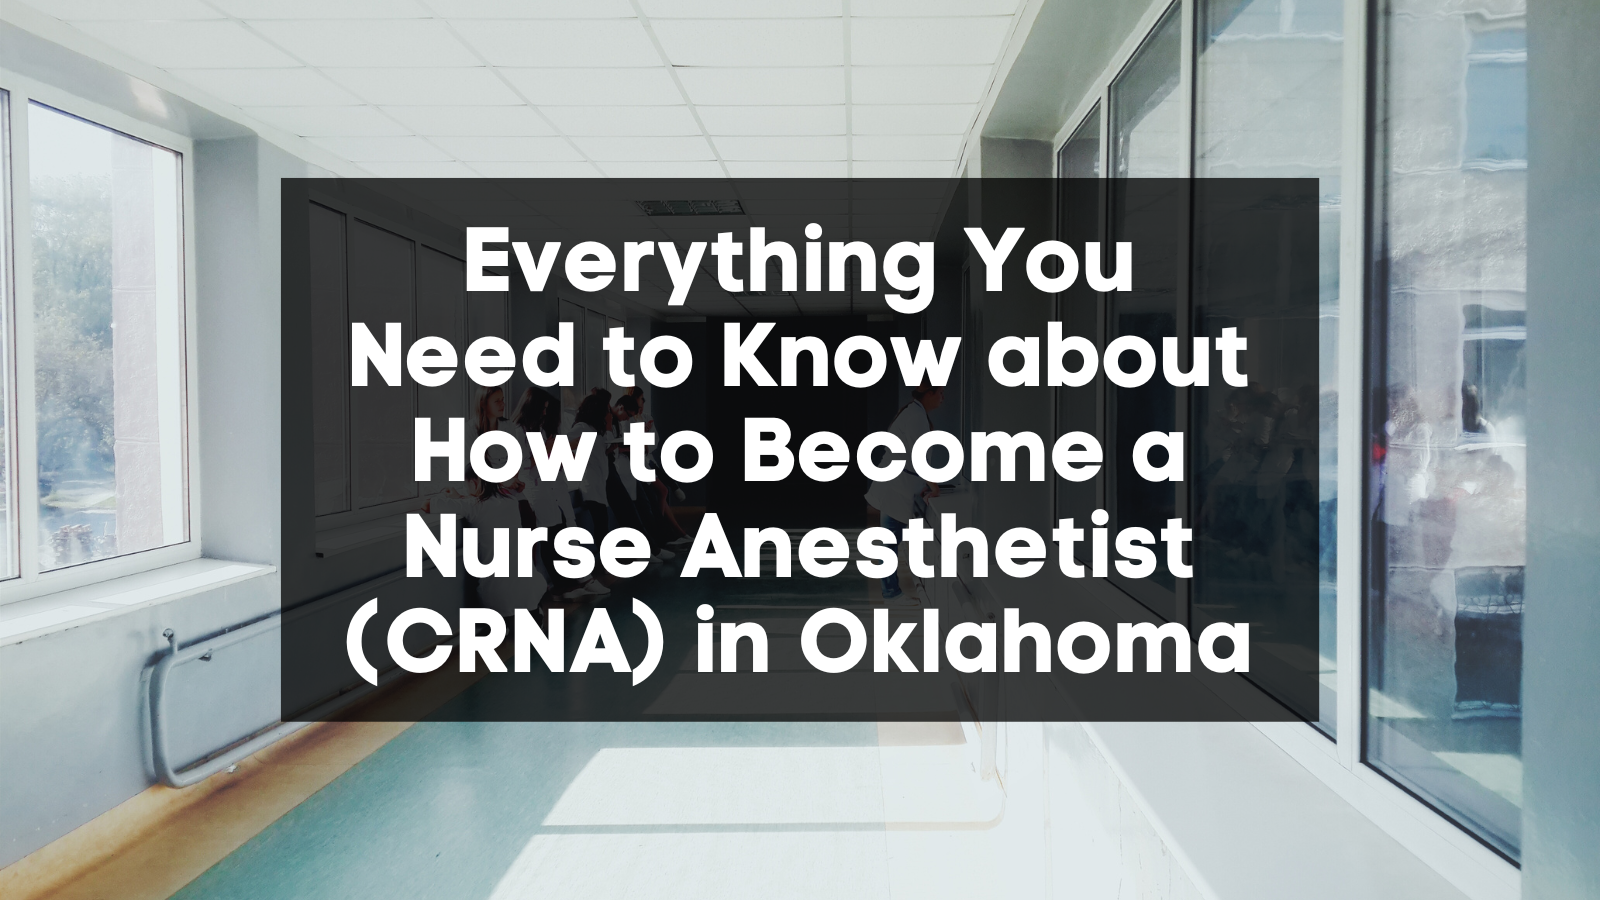 Everything You Need to Know about How to Become a Nurse Anesthetist (CRNA) in Oklahoma featured image